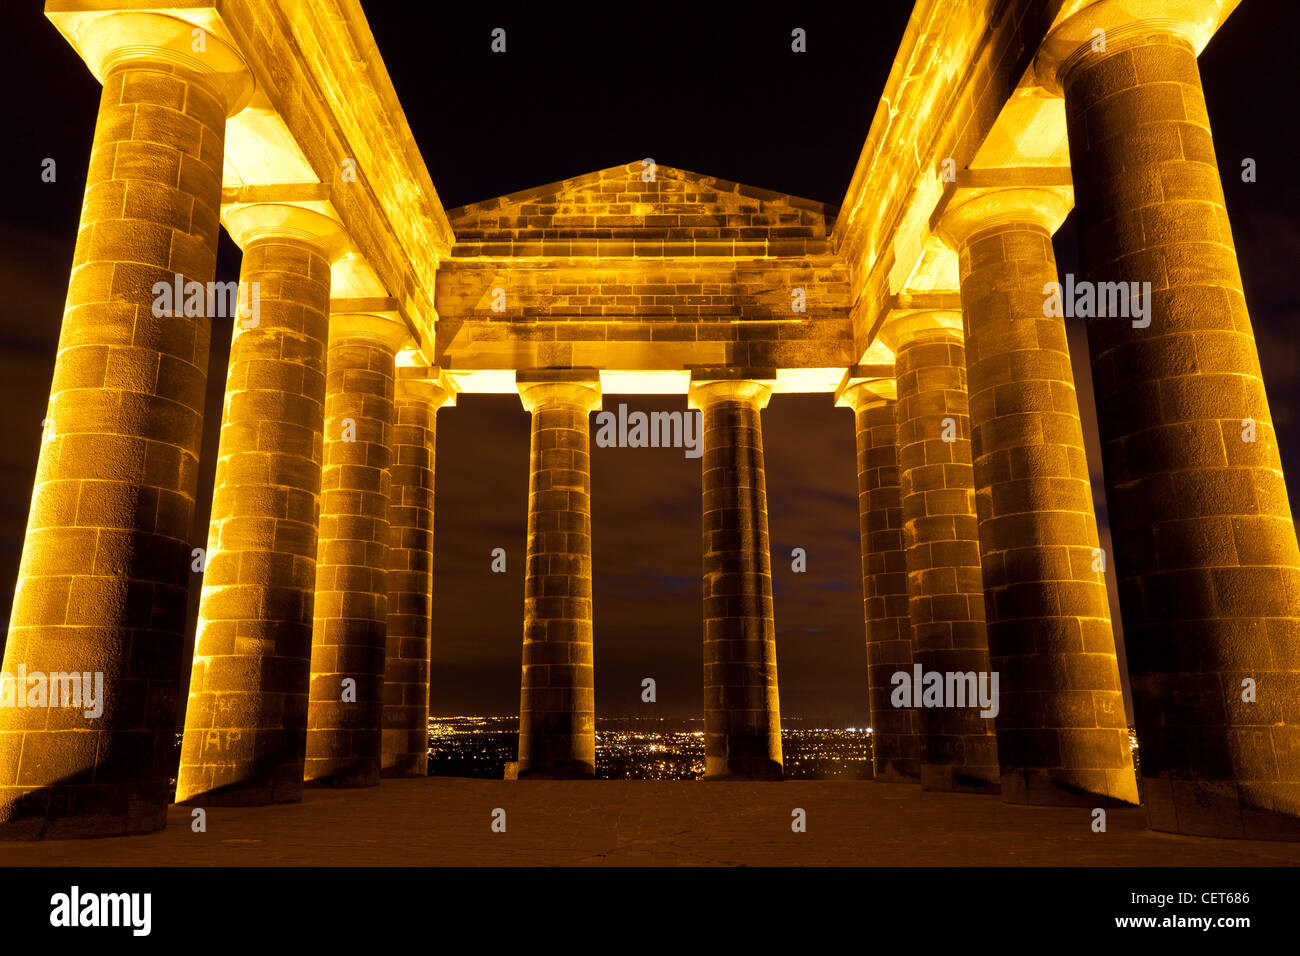 Night shot of Penshaw monument show wonderful rich colors of the stone pillars Stock Photo